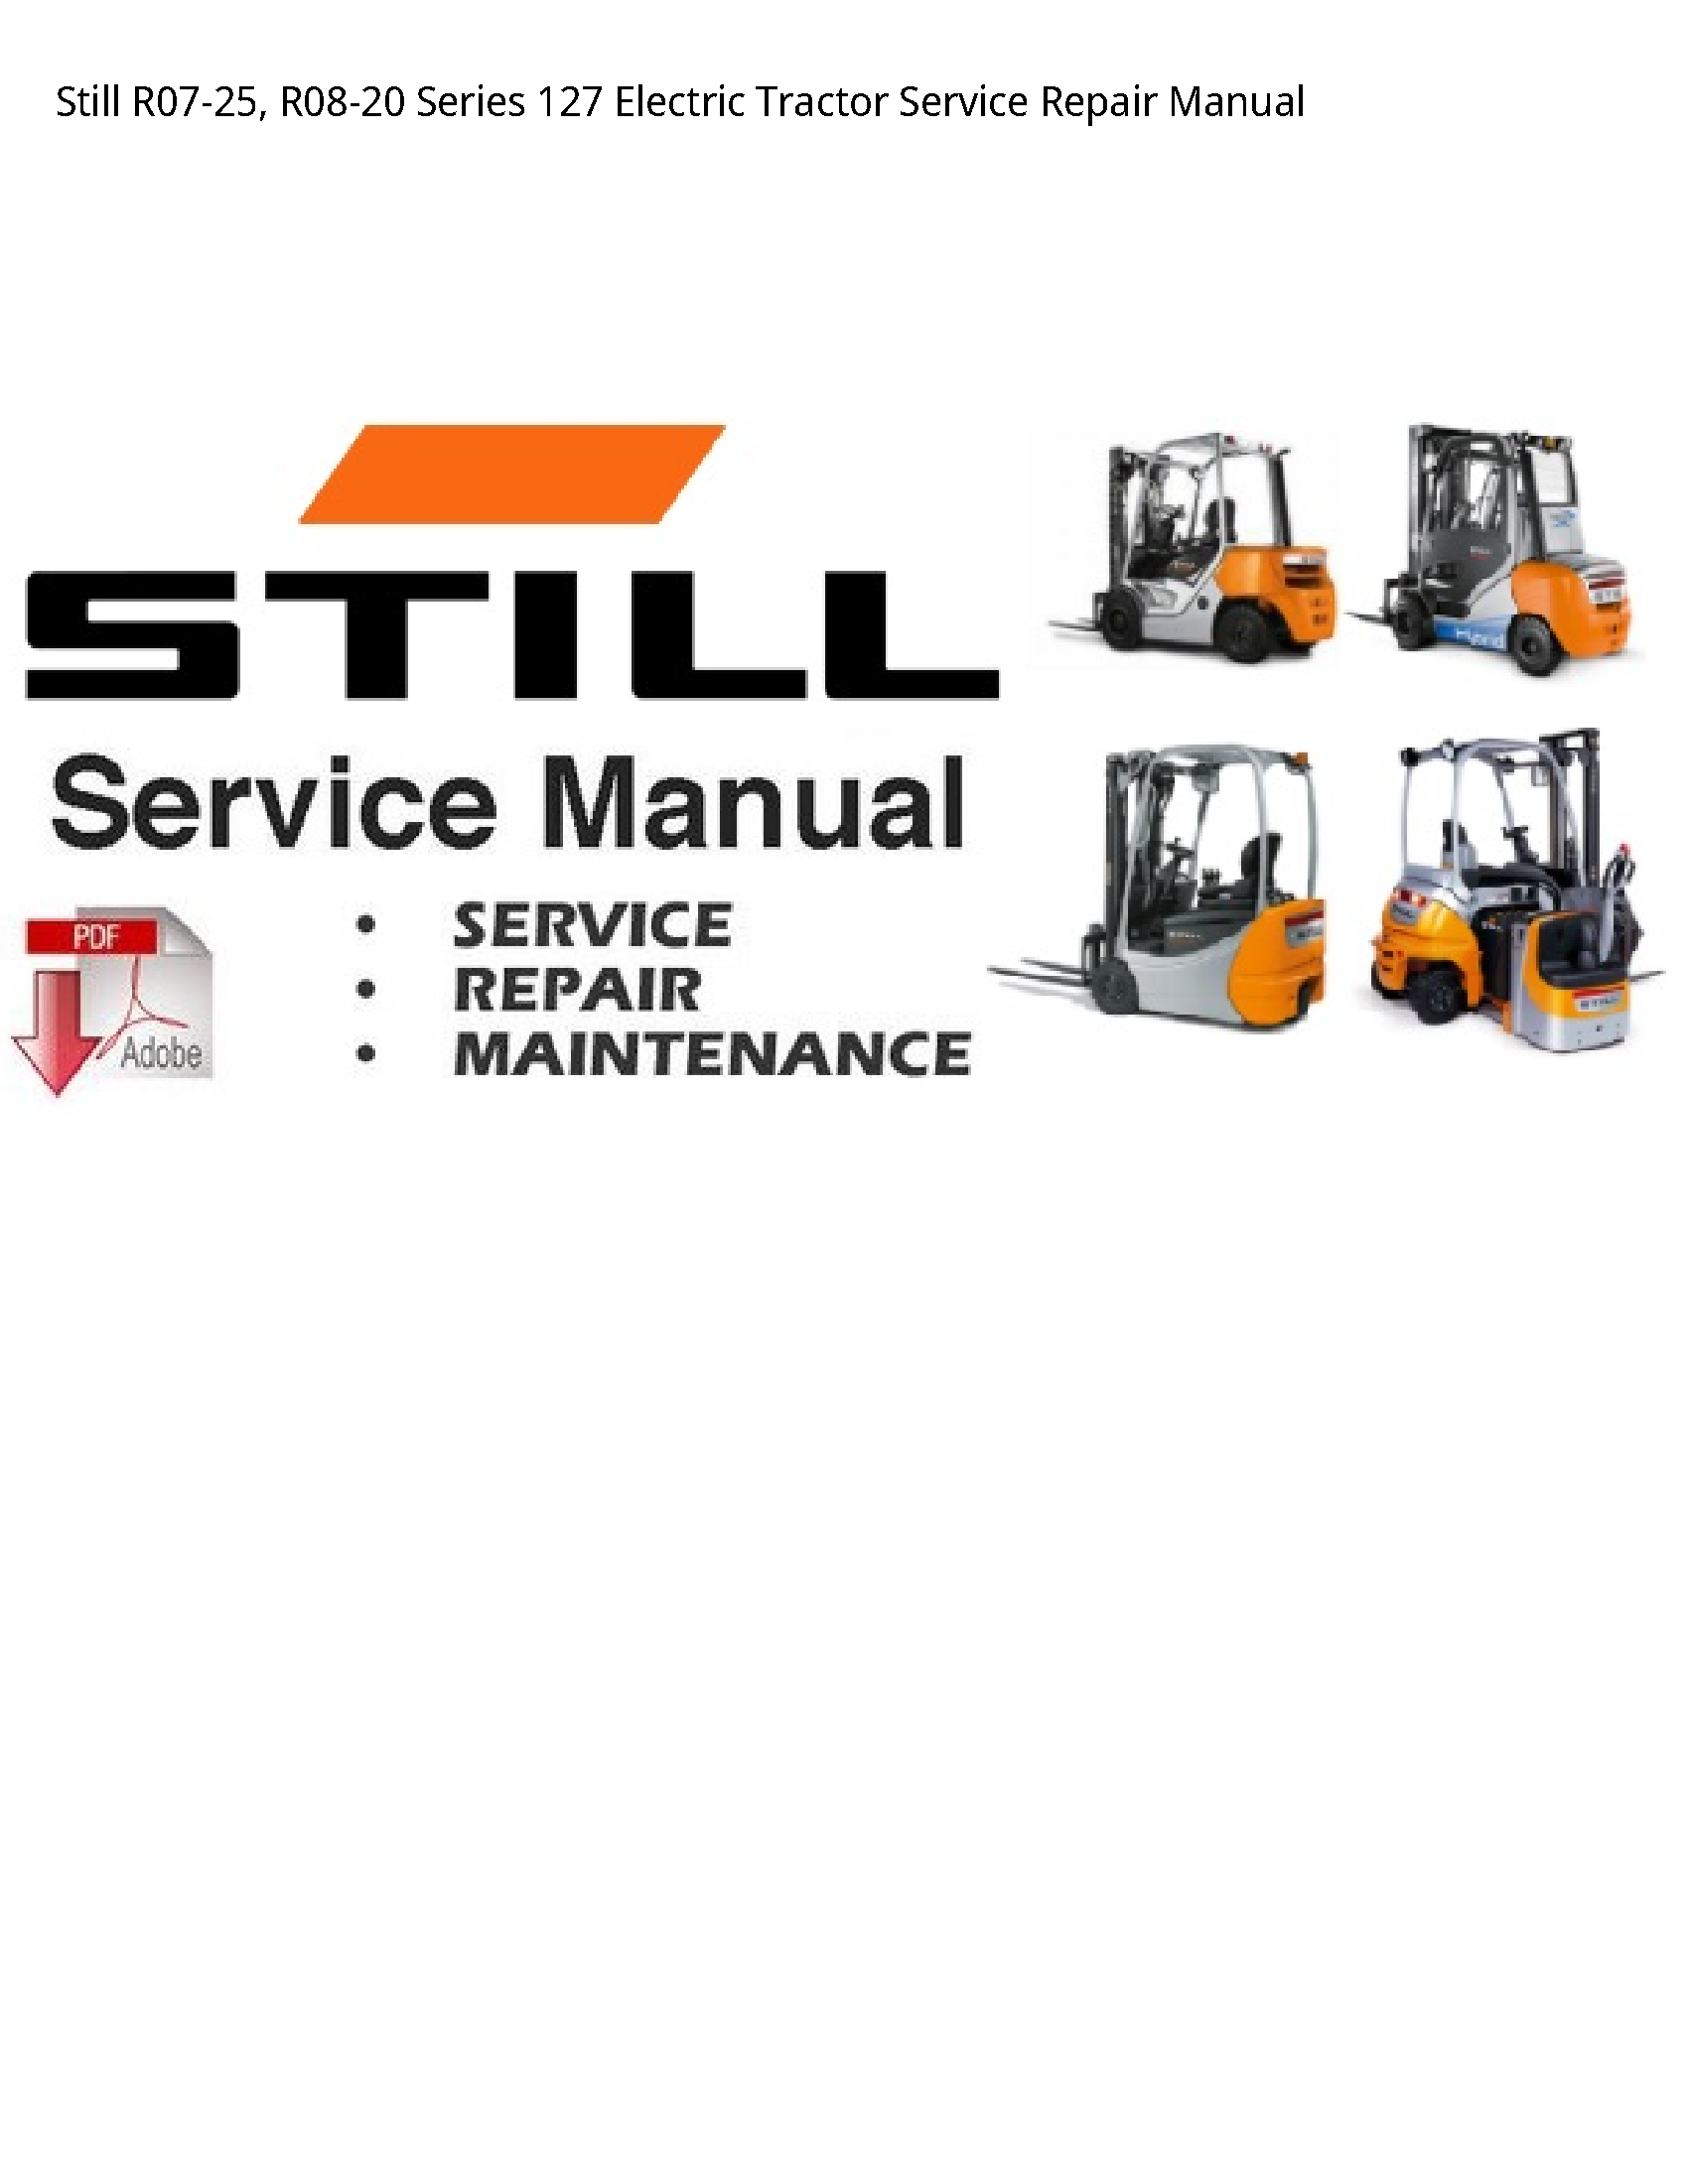 Still R07-25 Series Electric Tractor manual